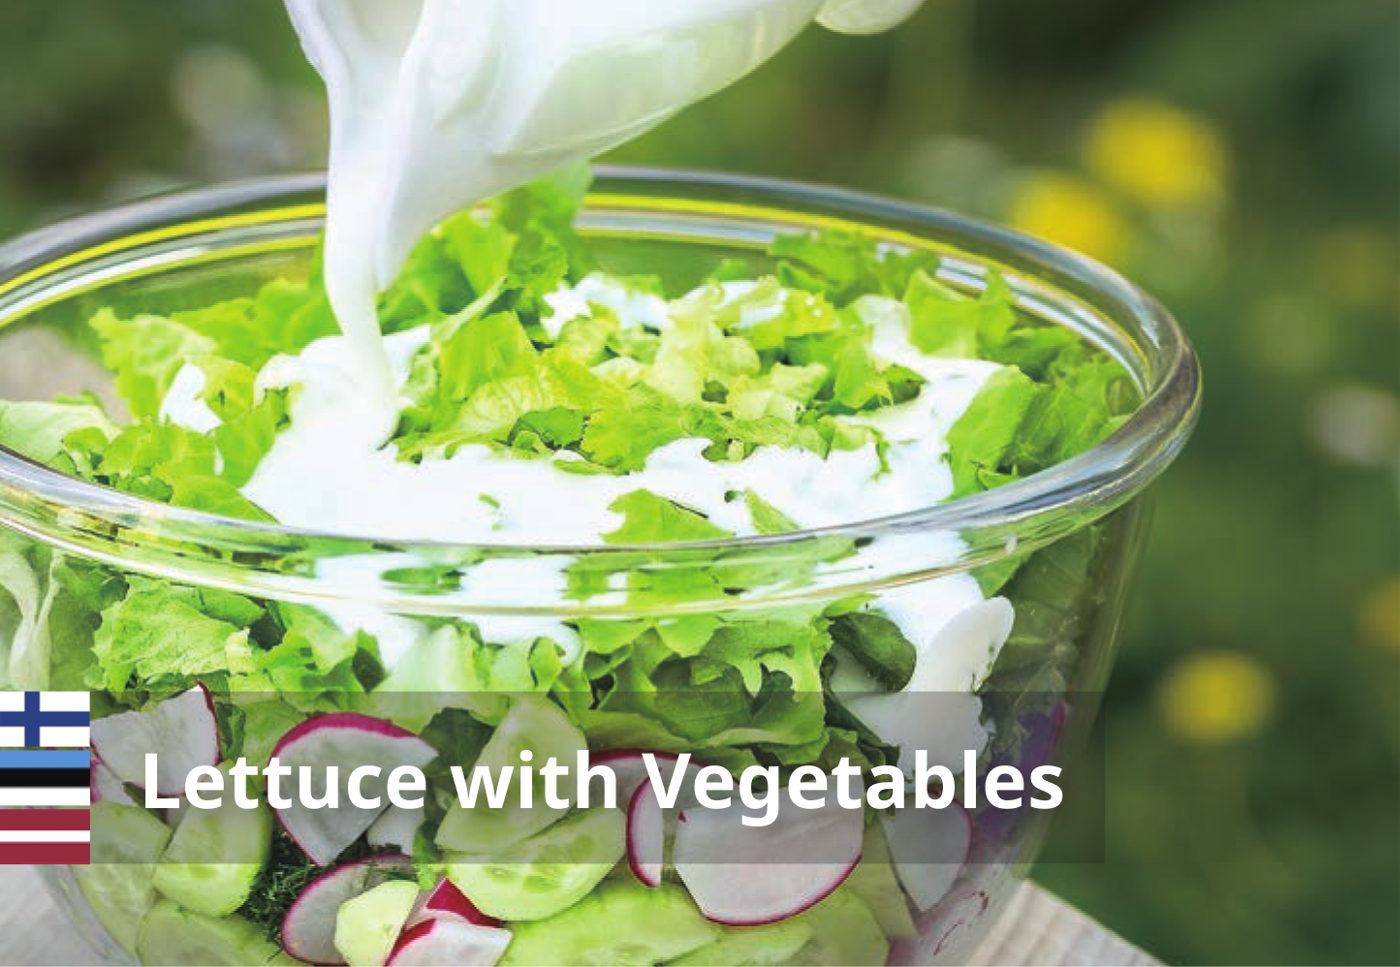 Lettuce with Vegetables